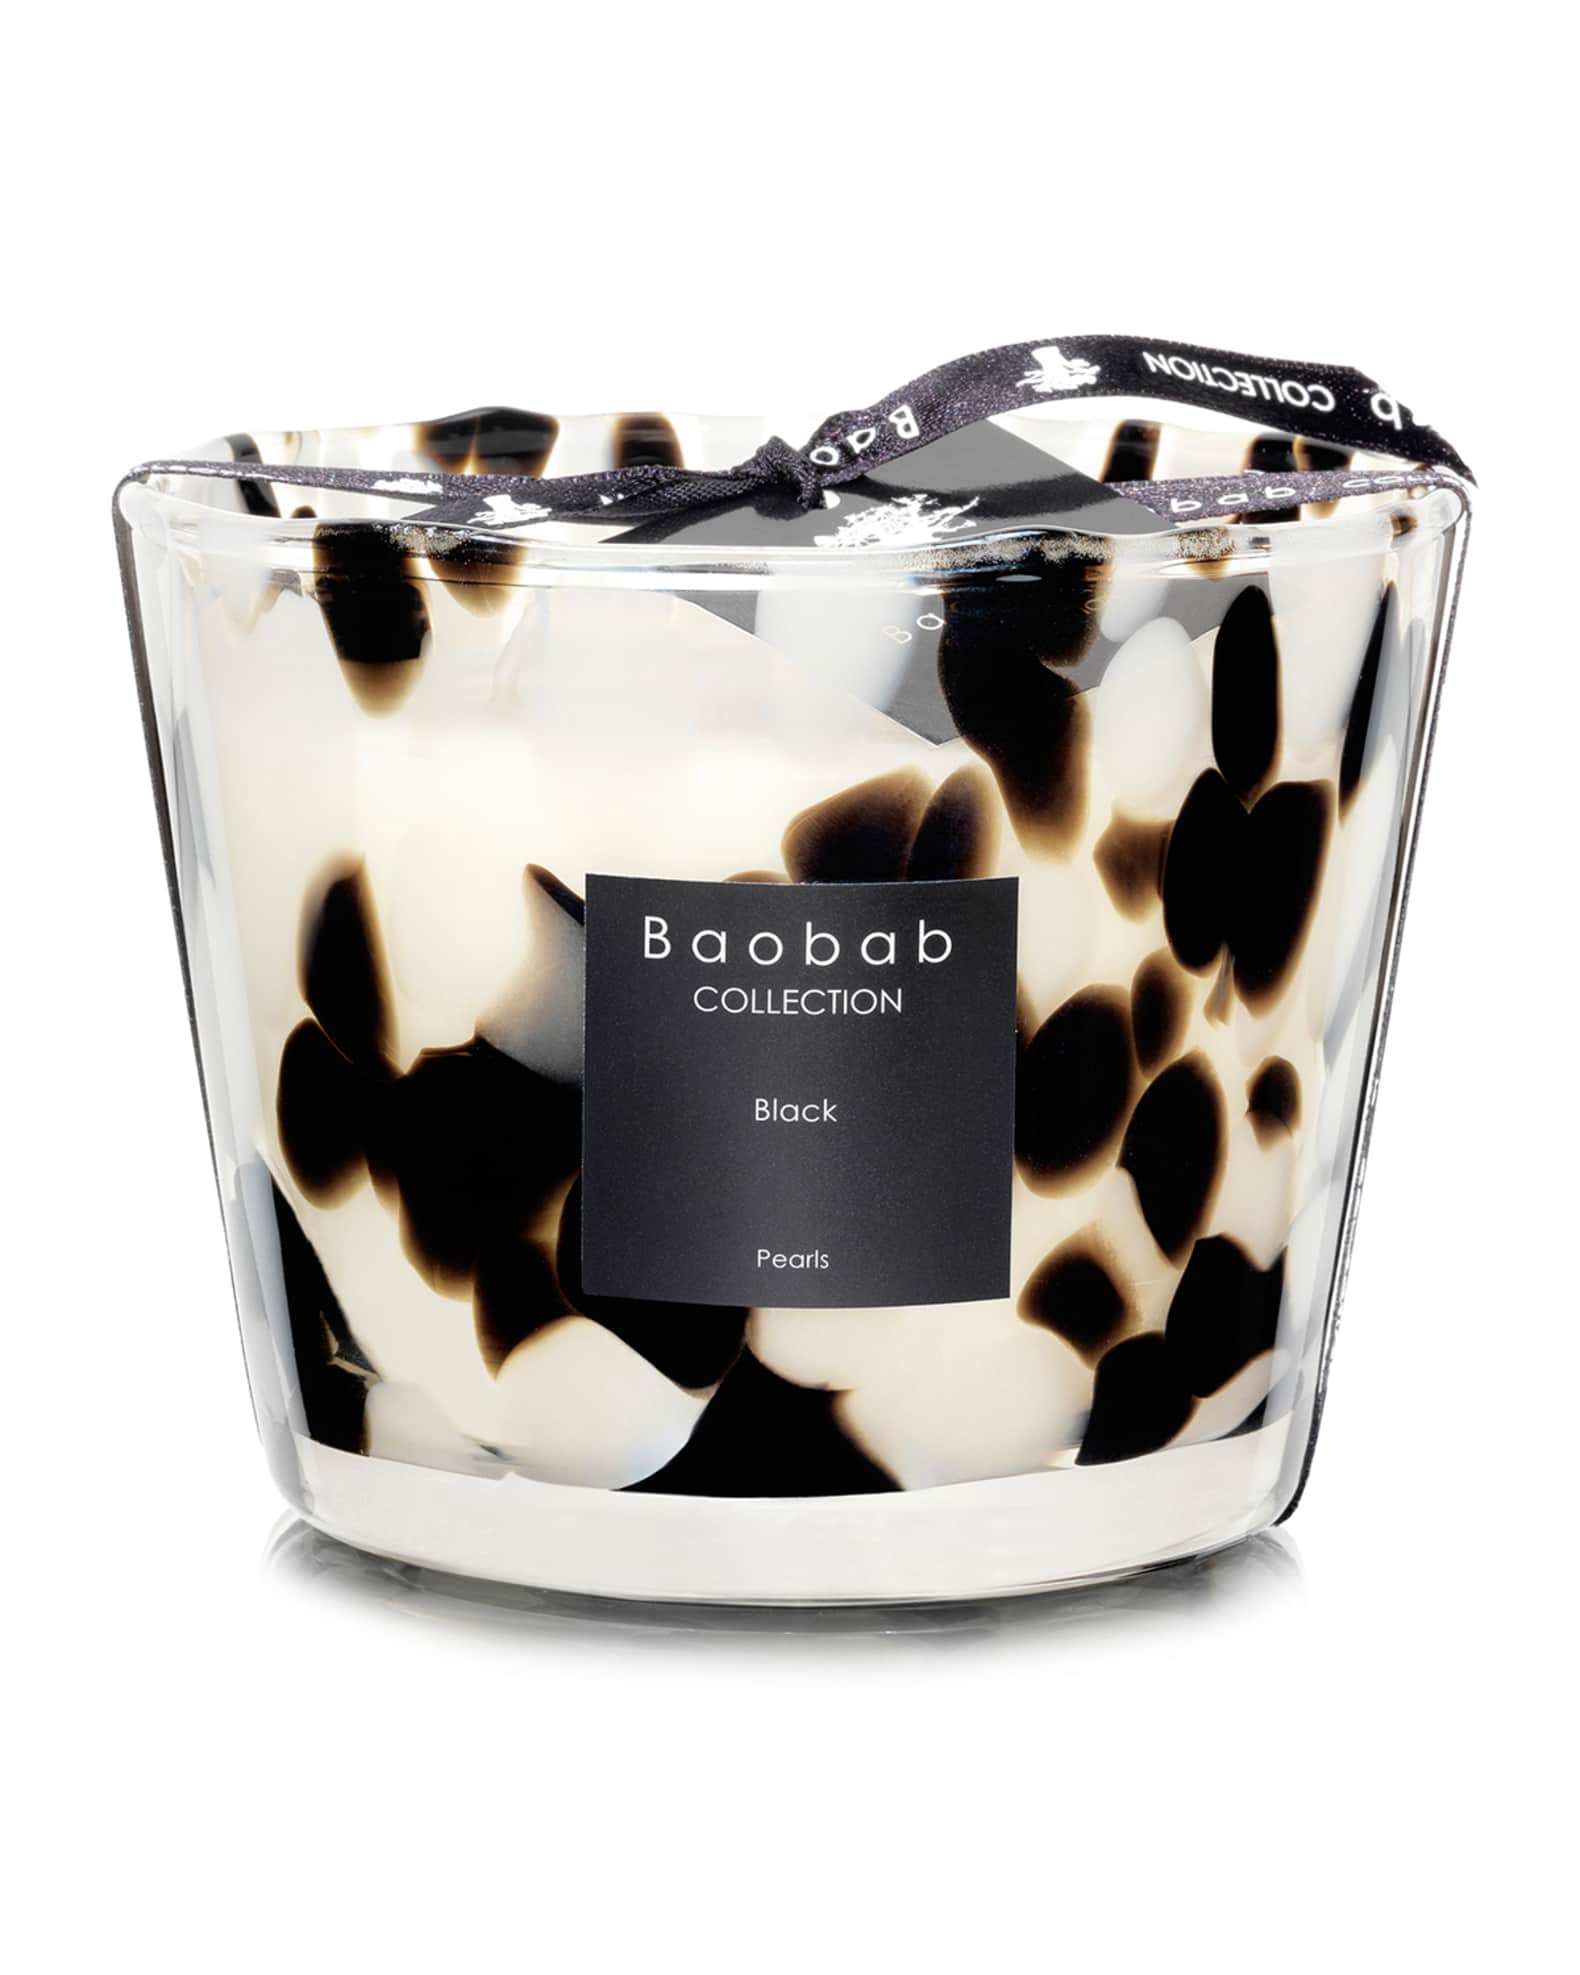 Baobab Collection Black Pearls Scented Candle, 3.9